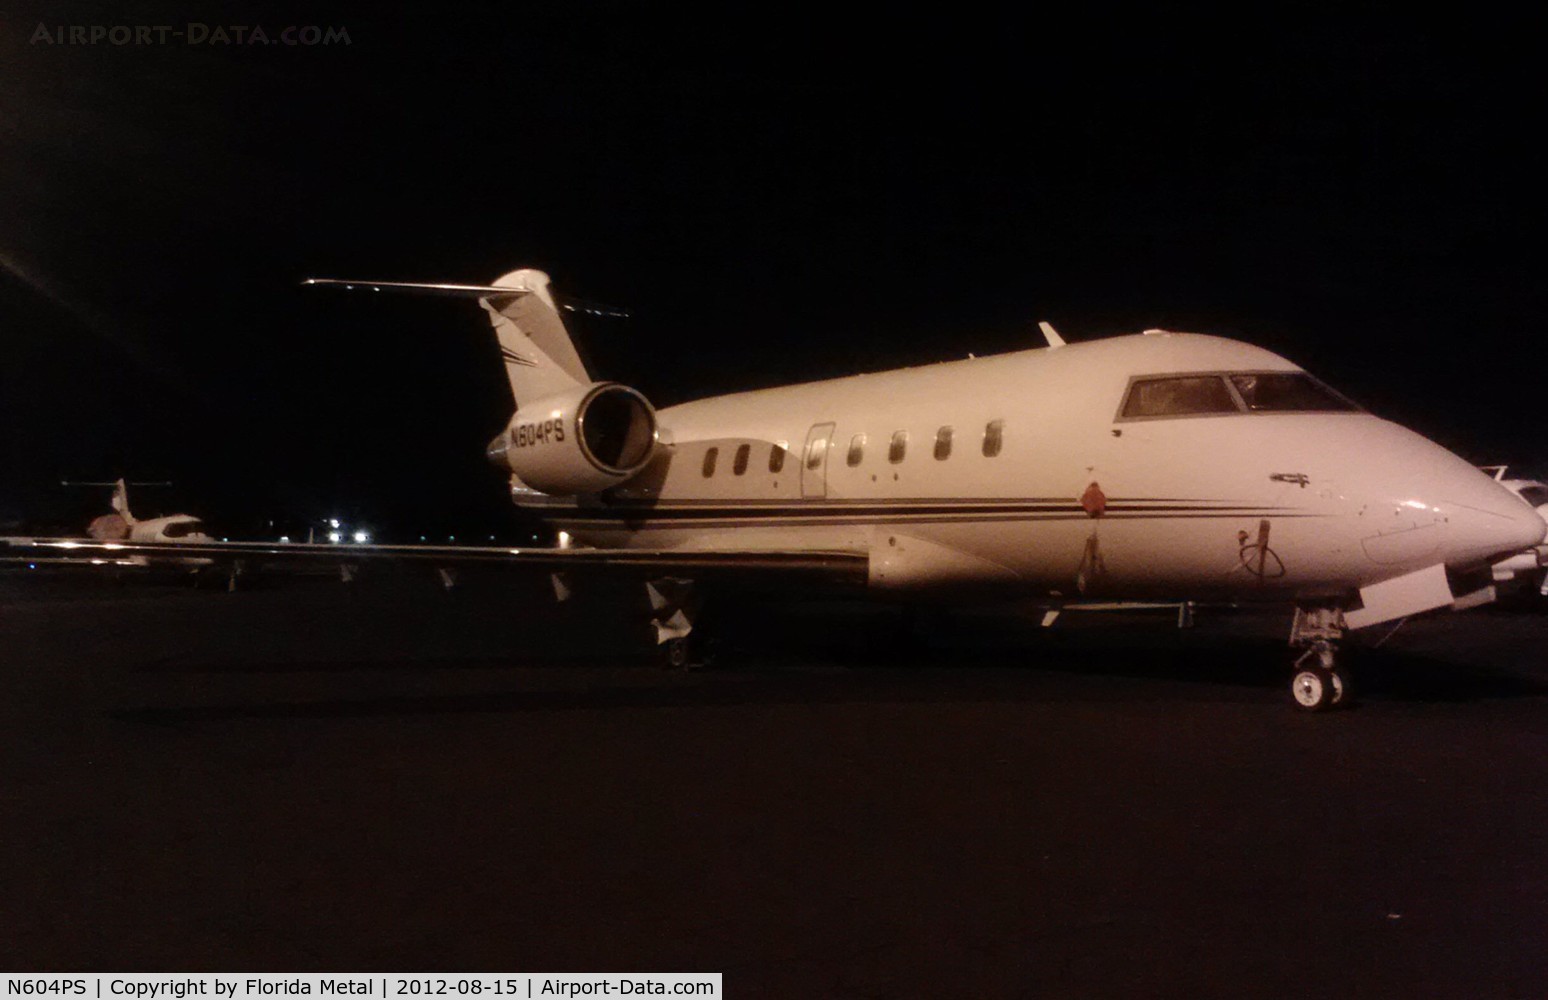 N604PS, 2000 Bombardier Challenger 604 (CL-600-2B16) C/N 5447, Challenger 604 from Droid phone